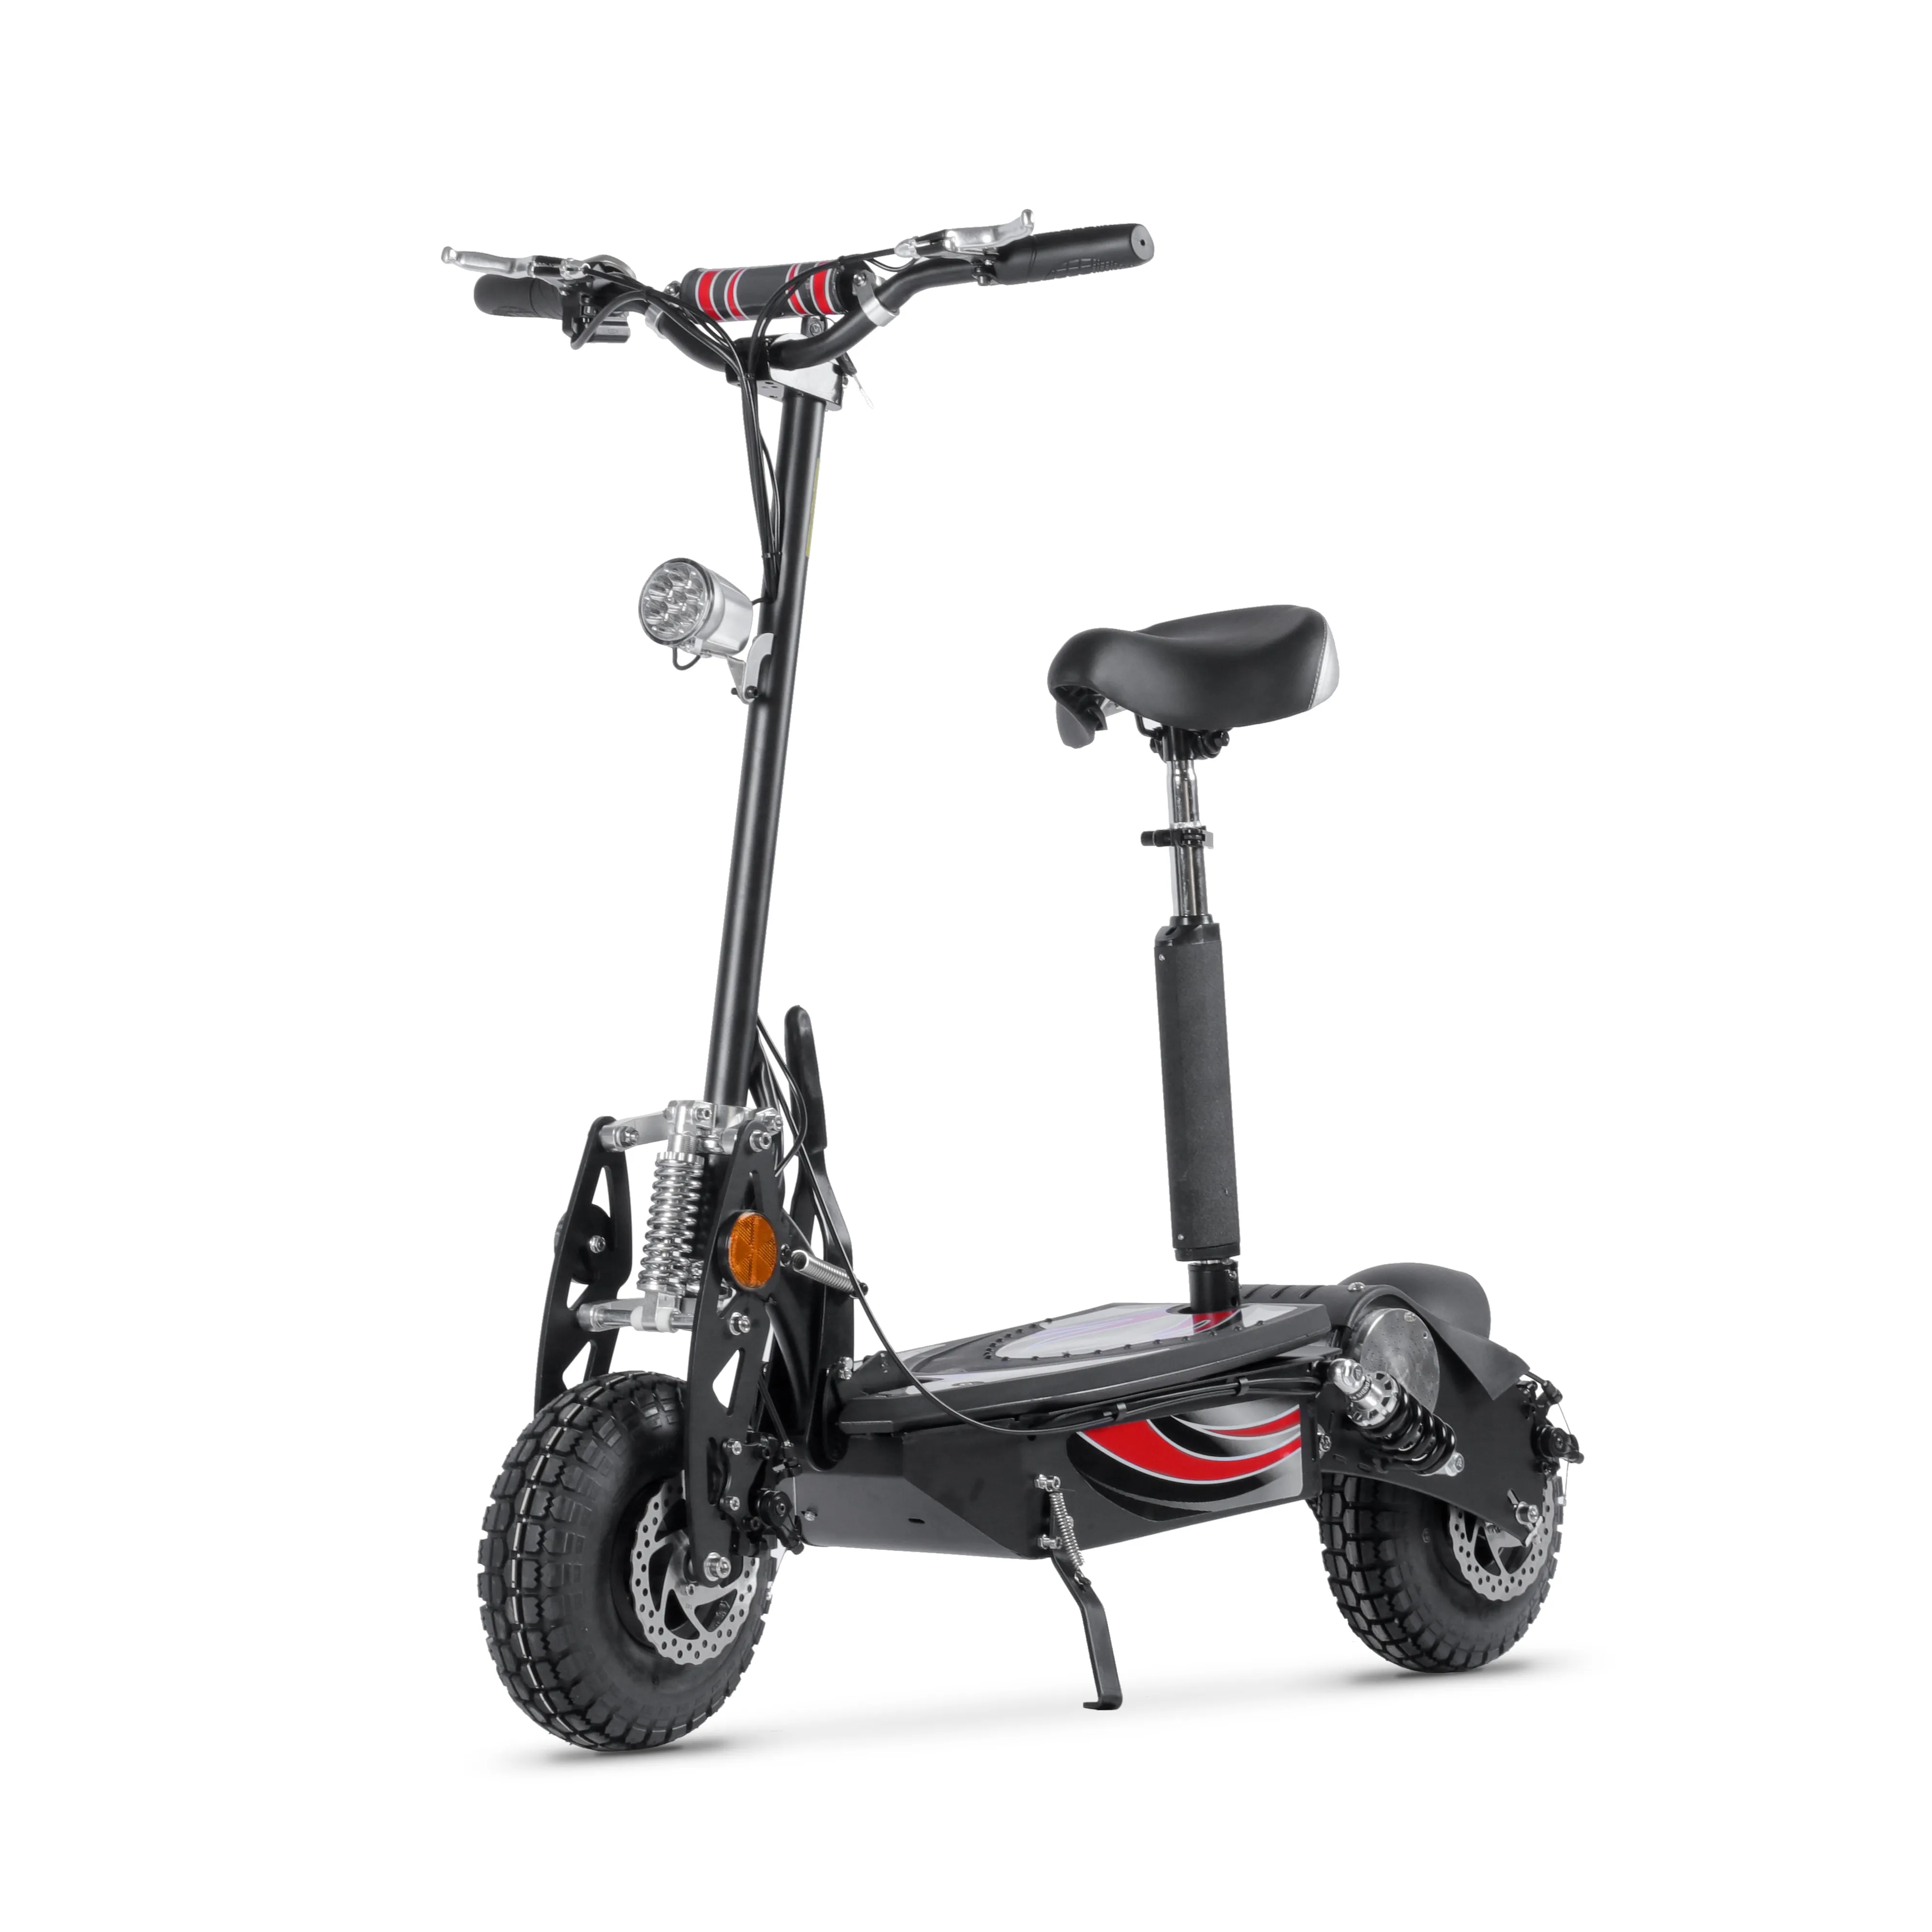 48V1600W Motor Powerful Escooter 14" Fat Tire 12AH Long range Foldable Off Road with Seat Electric Scooter